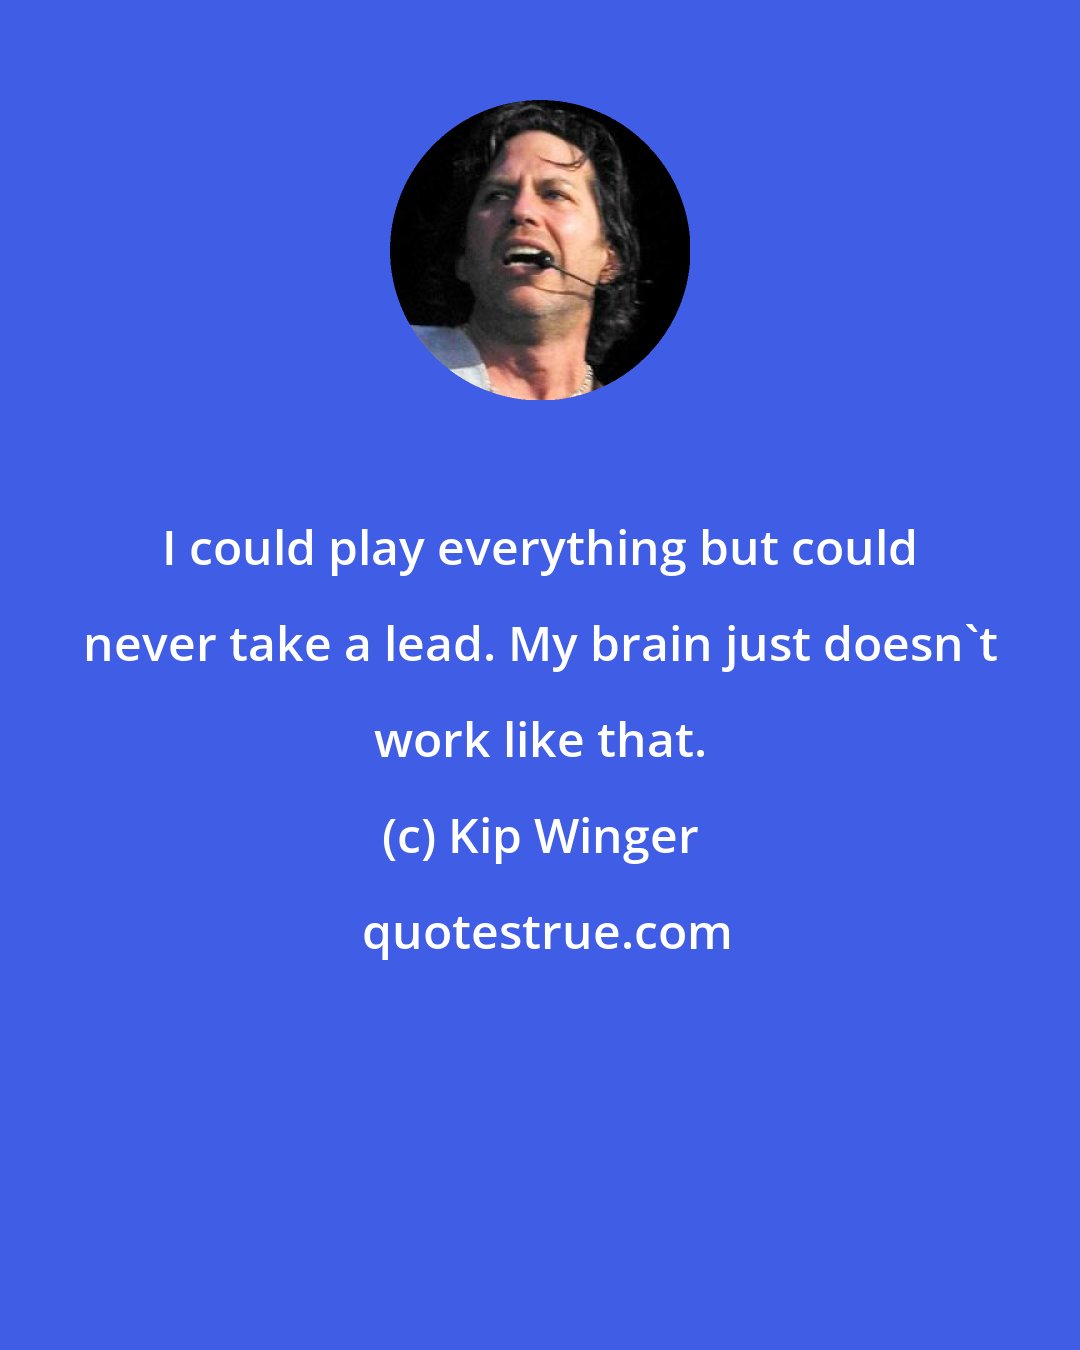 Kip Winger: I could play everything but could never take a lead. My brain just doesn't work like that.